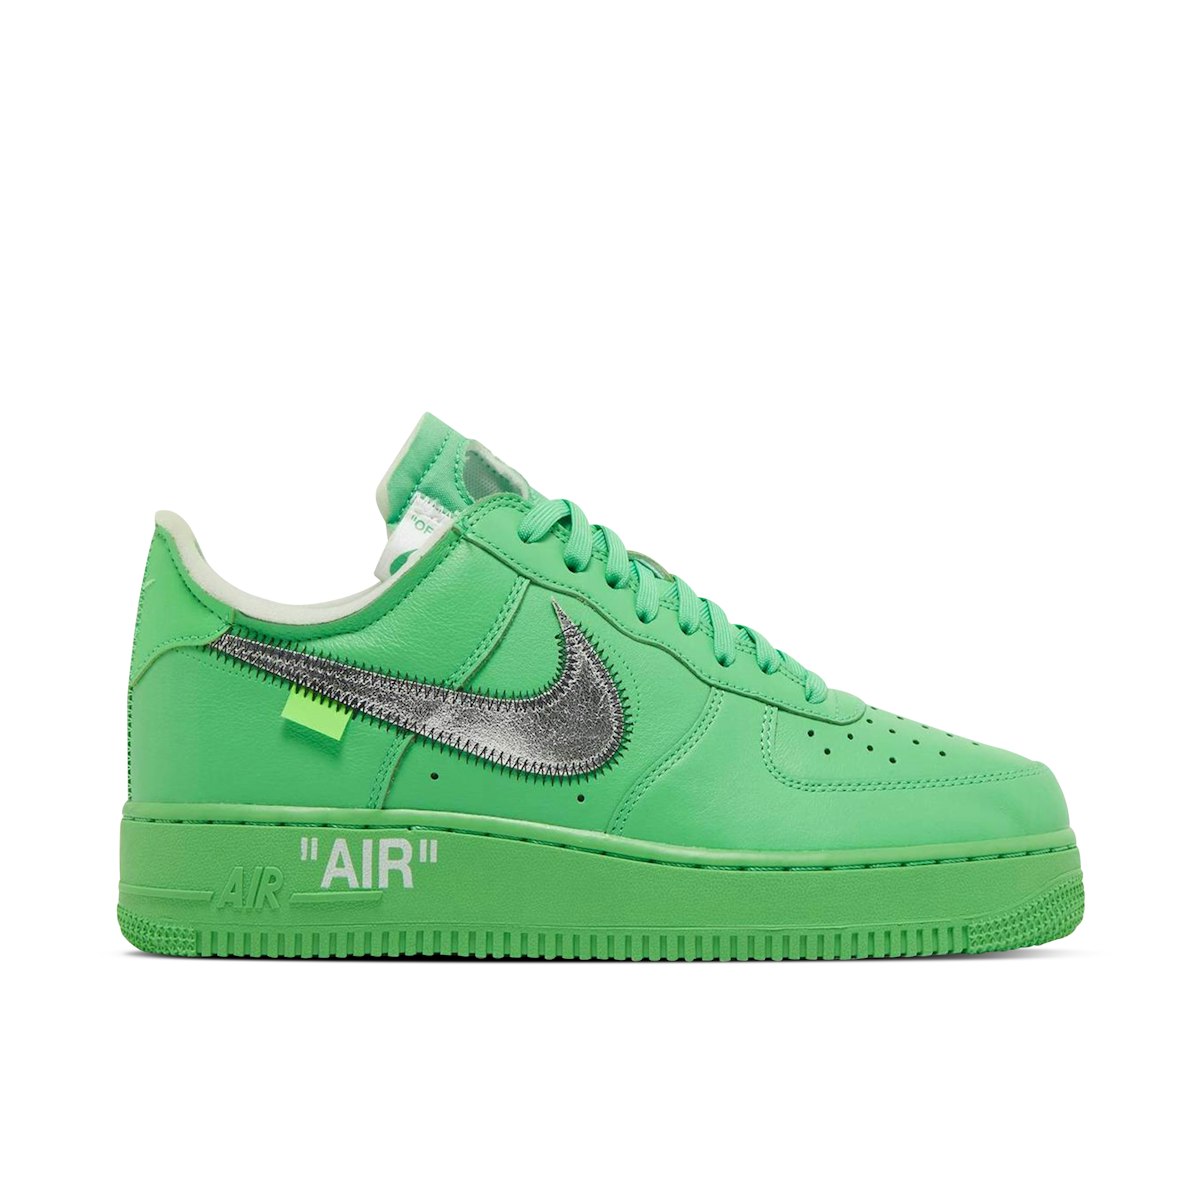 OFF-WHITE x Nike Air Force 1 Low MCA Dropping This Weekend